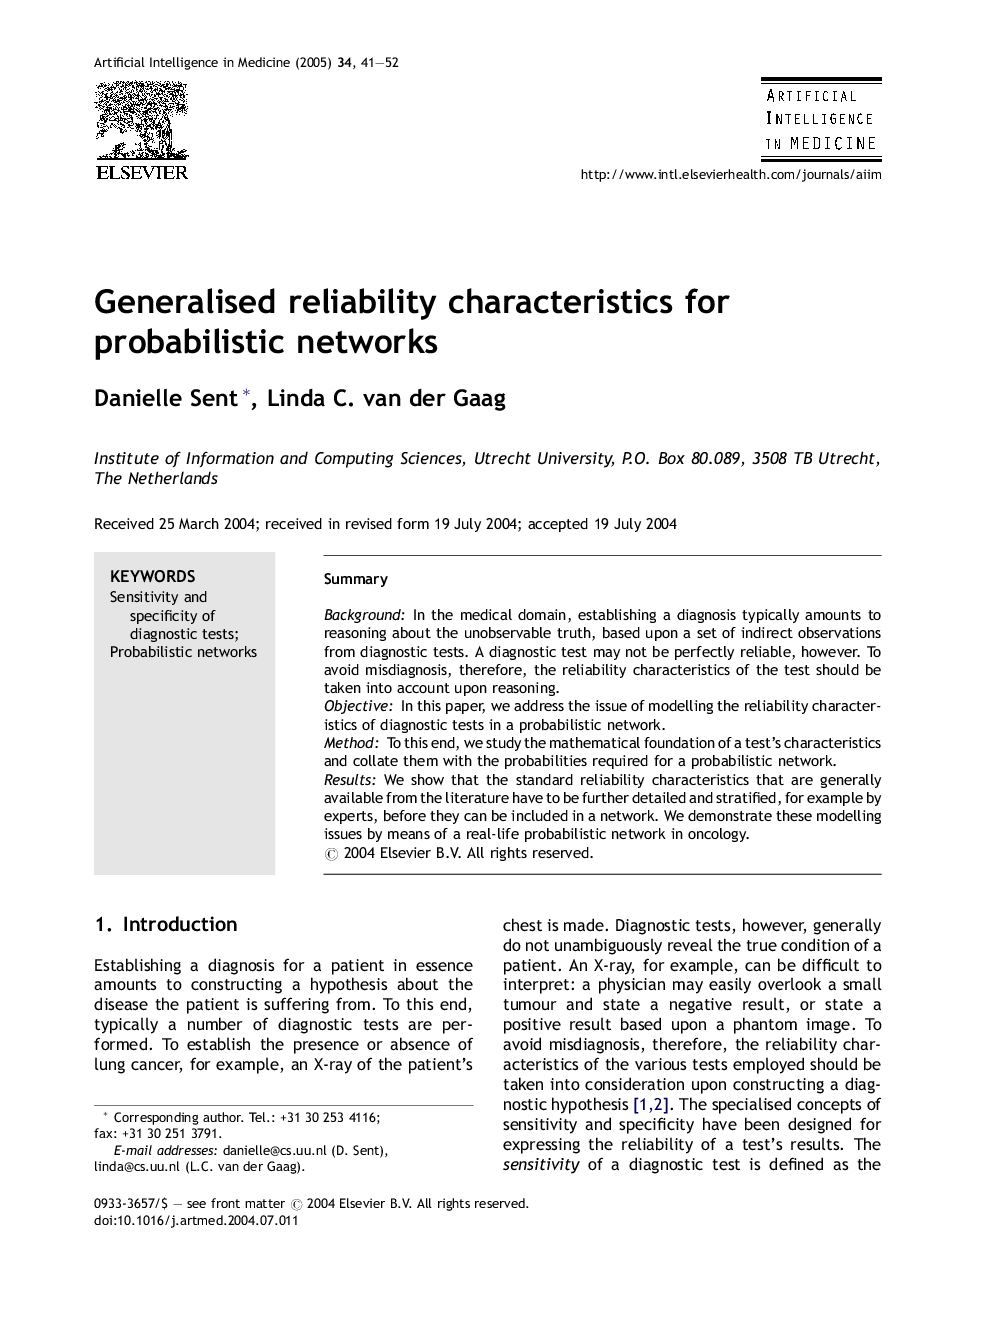 Generalised reliability characteristics for probabilistic networks